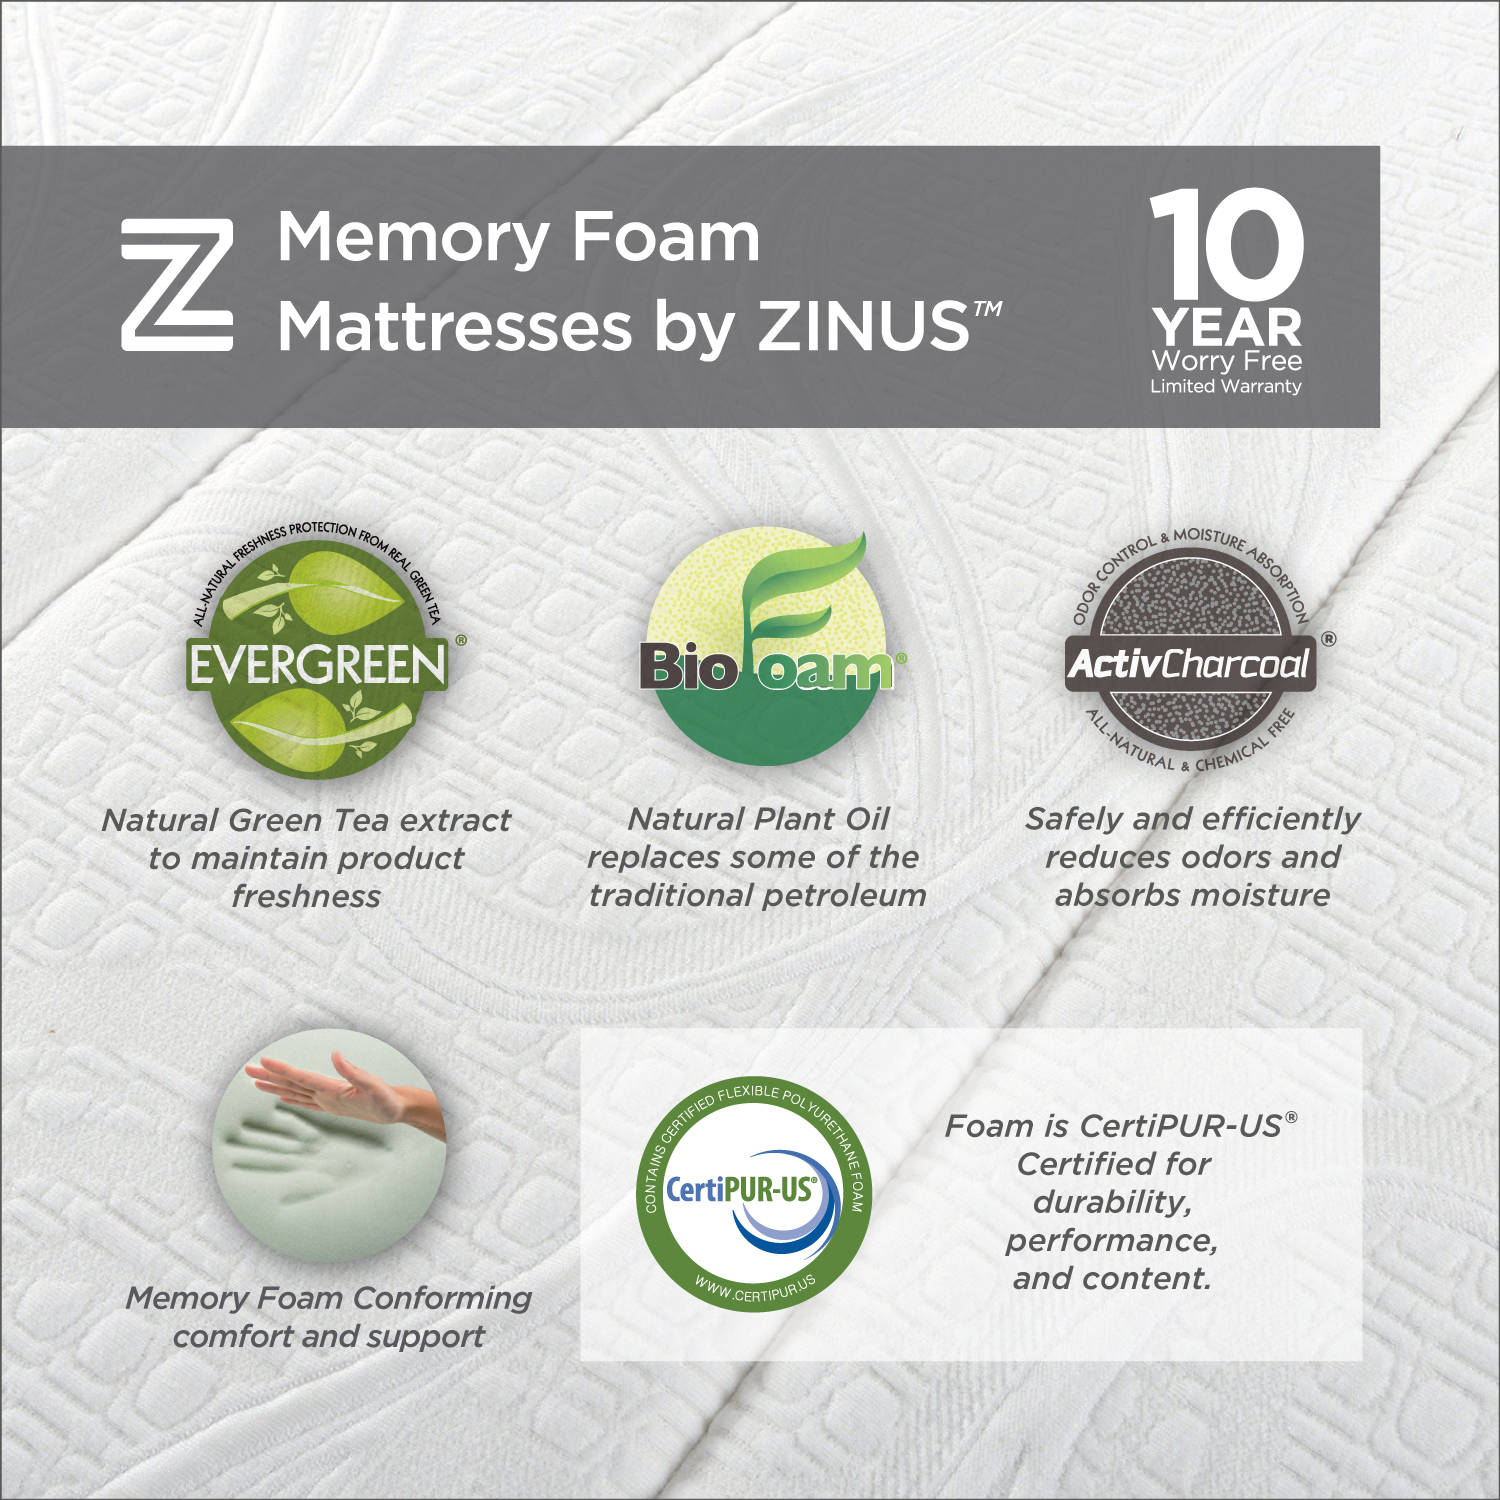 Spa Sensations By Zinus 4" Memory Foam Mattress Topper with Theratouch, Twin - image 5 of 10